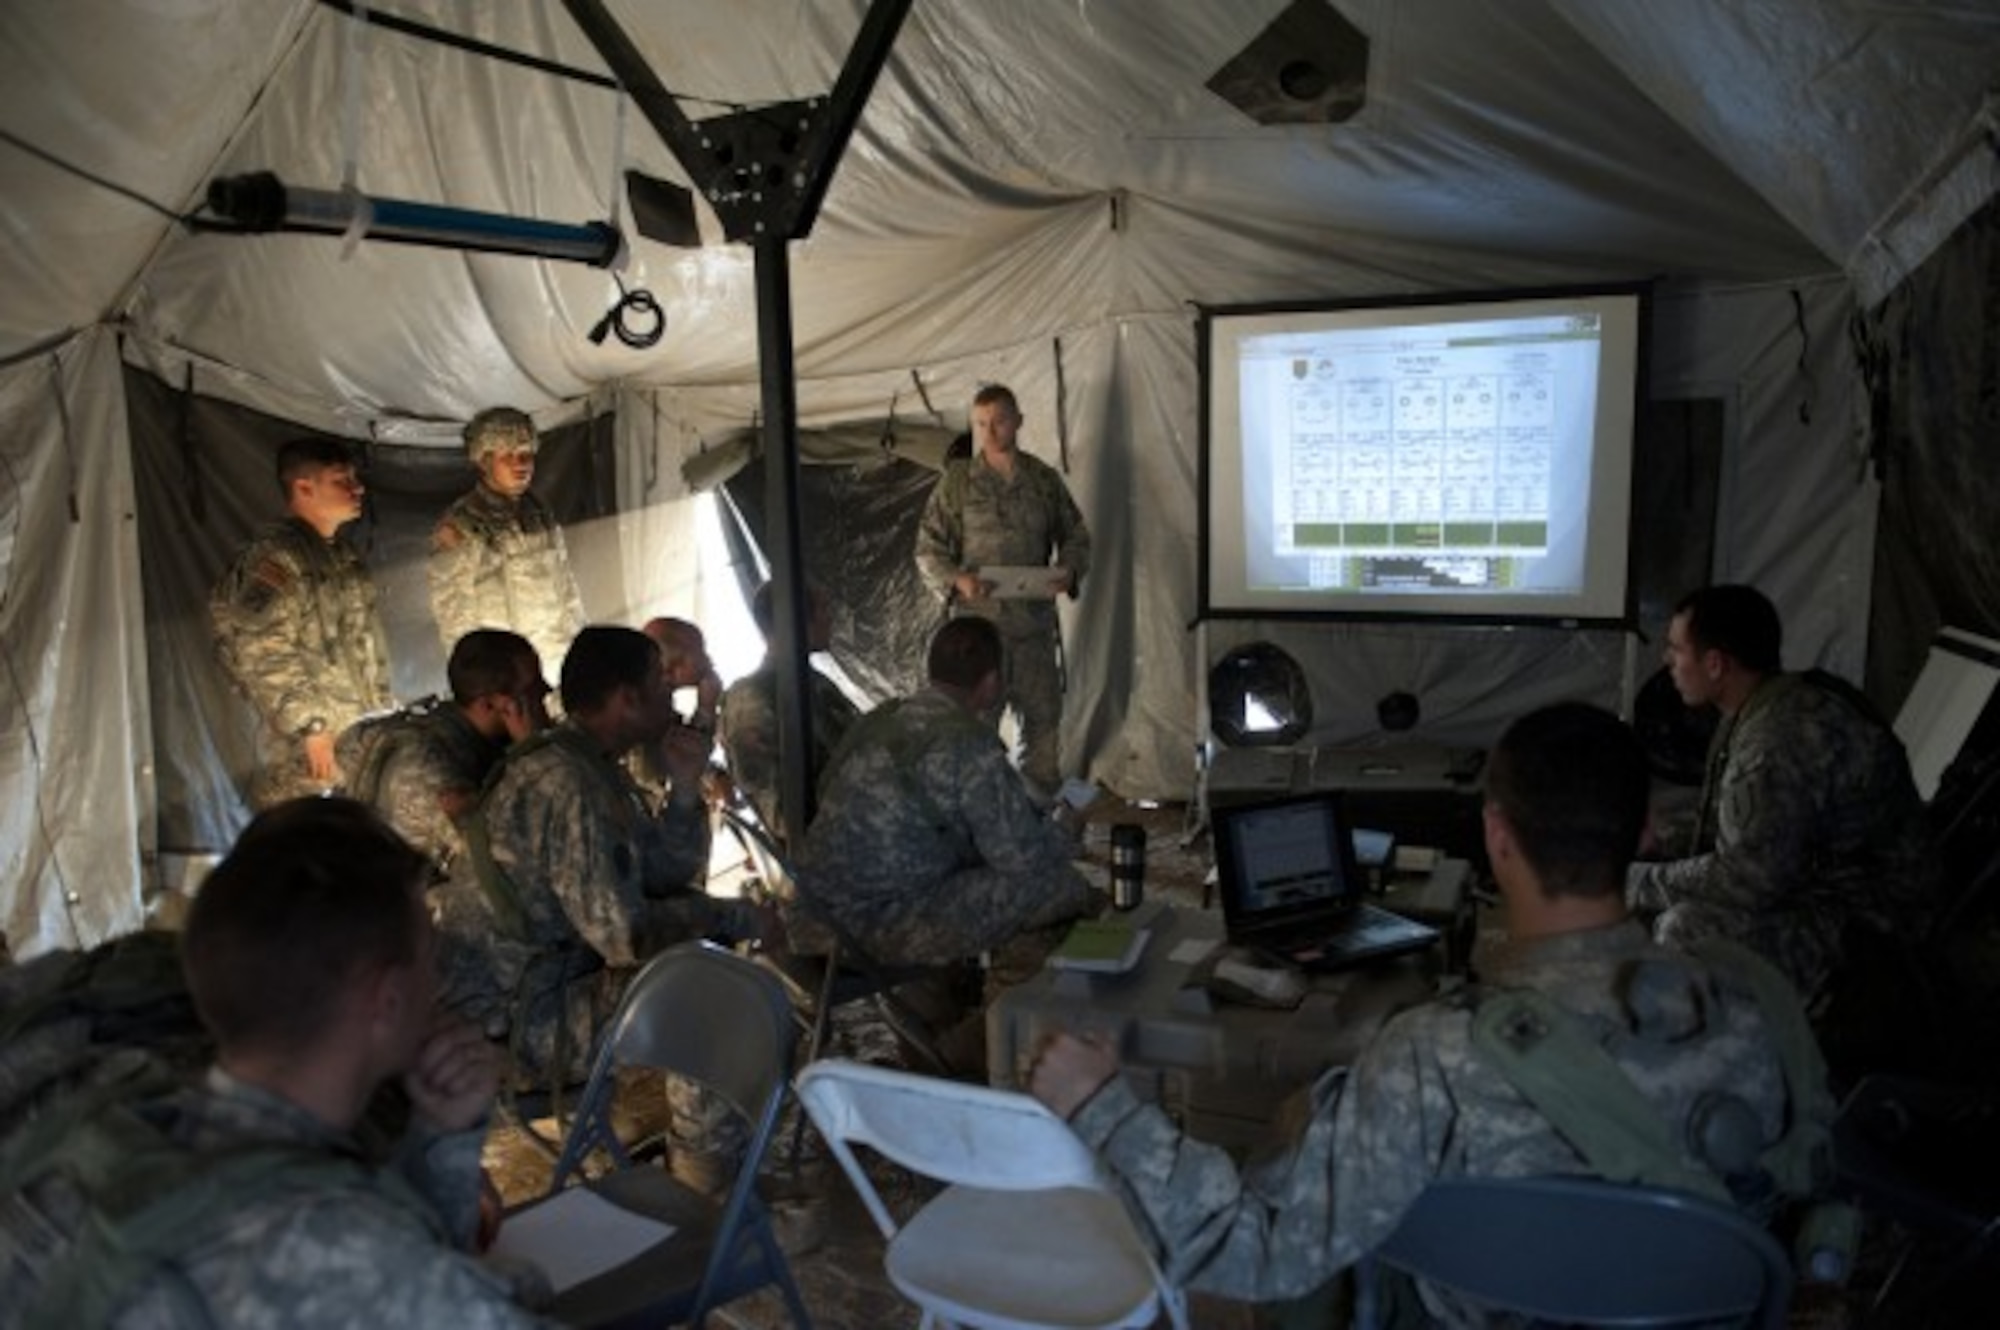 Bagram Air Base, Afghanistan -- Staff Sgt. Christopher Dearborn (back center) briefs Soldiers during training at Fort Irwin, Calif. Dearborn is a battlefield weather forecaster assigned to the 3rd Weather Squadron at Fort Riley, Kan. (U.S. Air Force photo/Val Gempis)